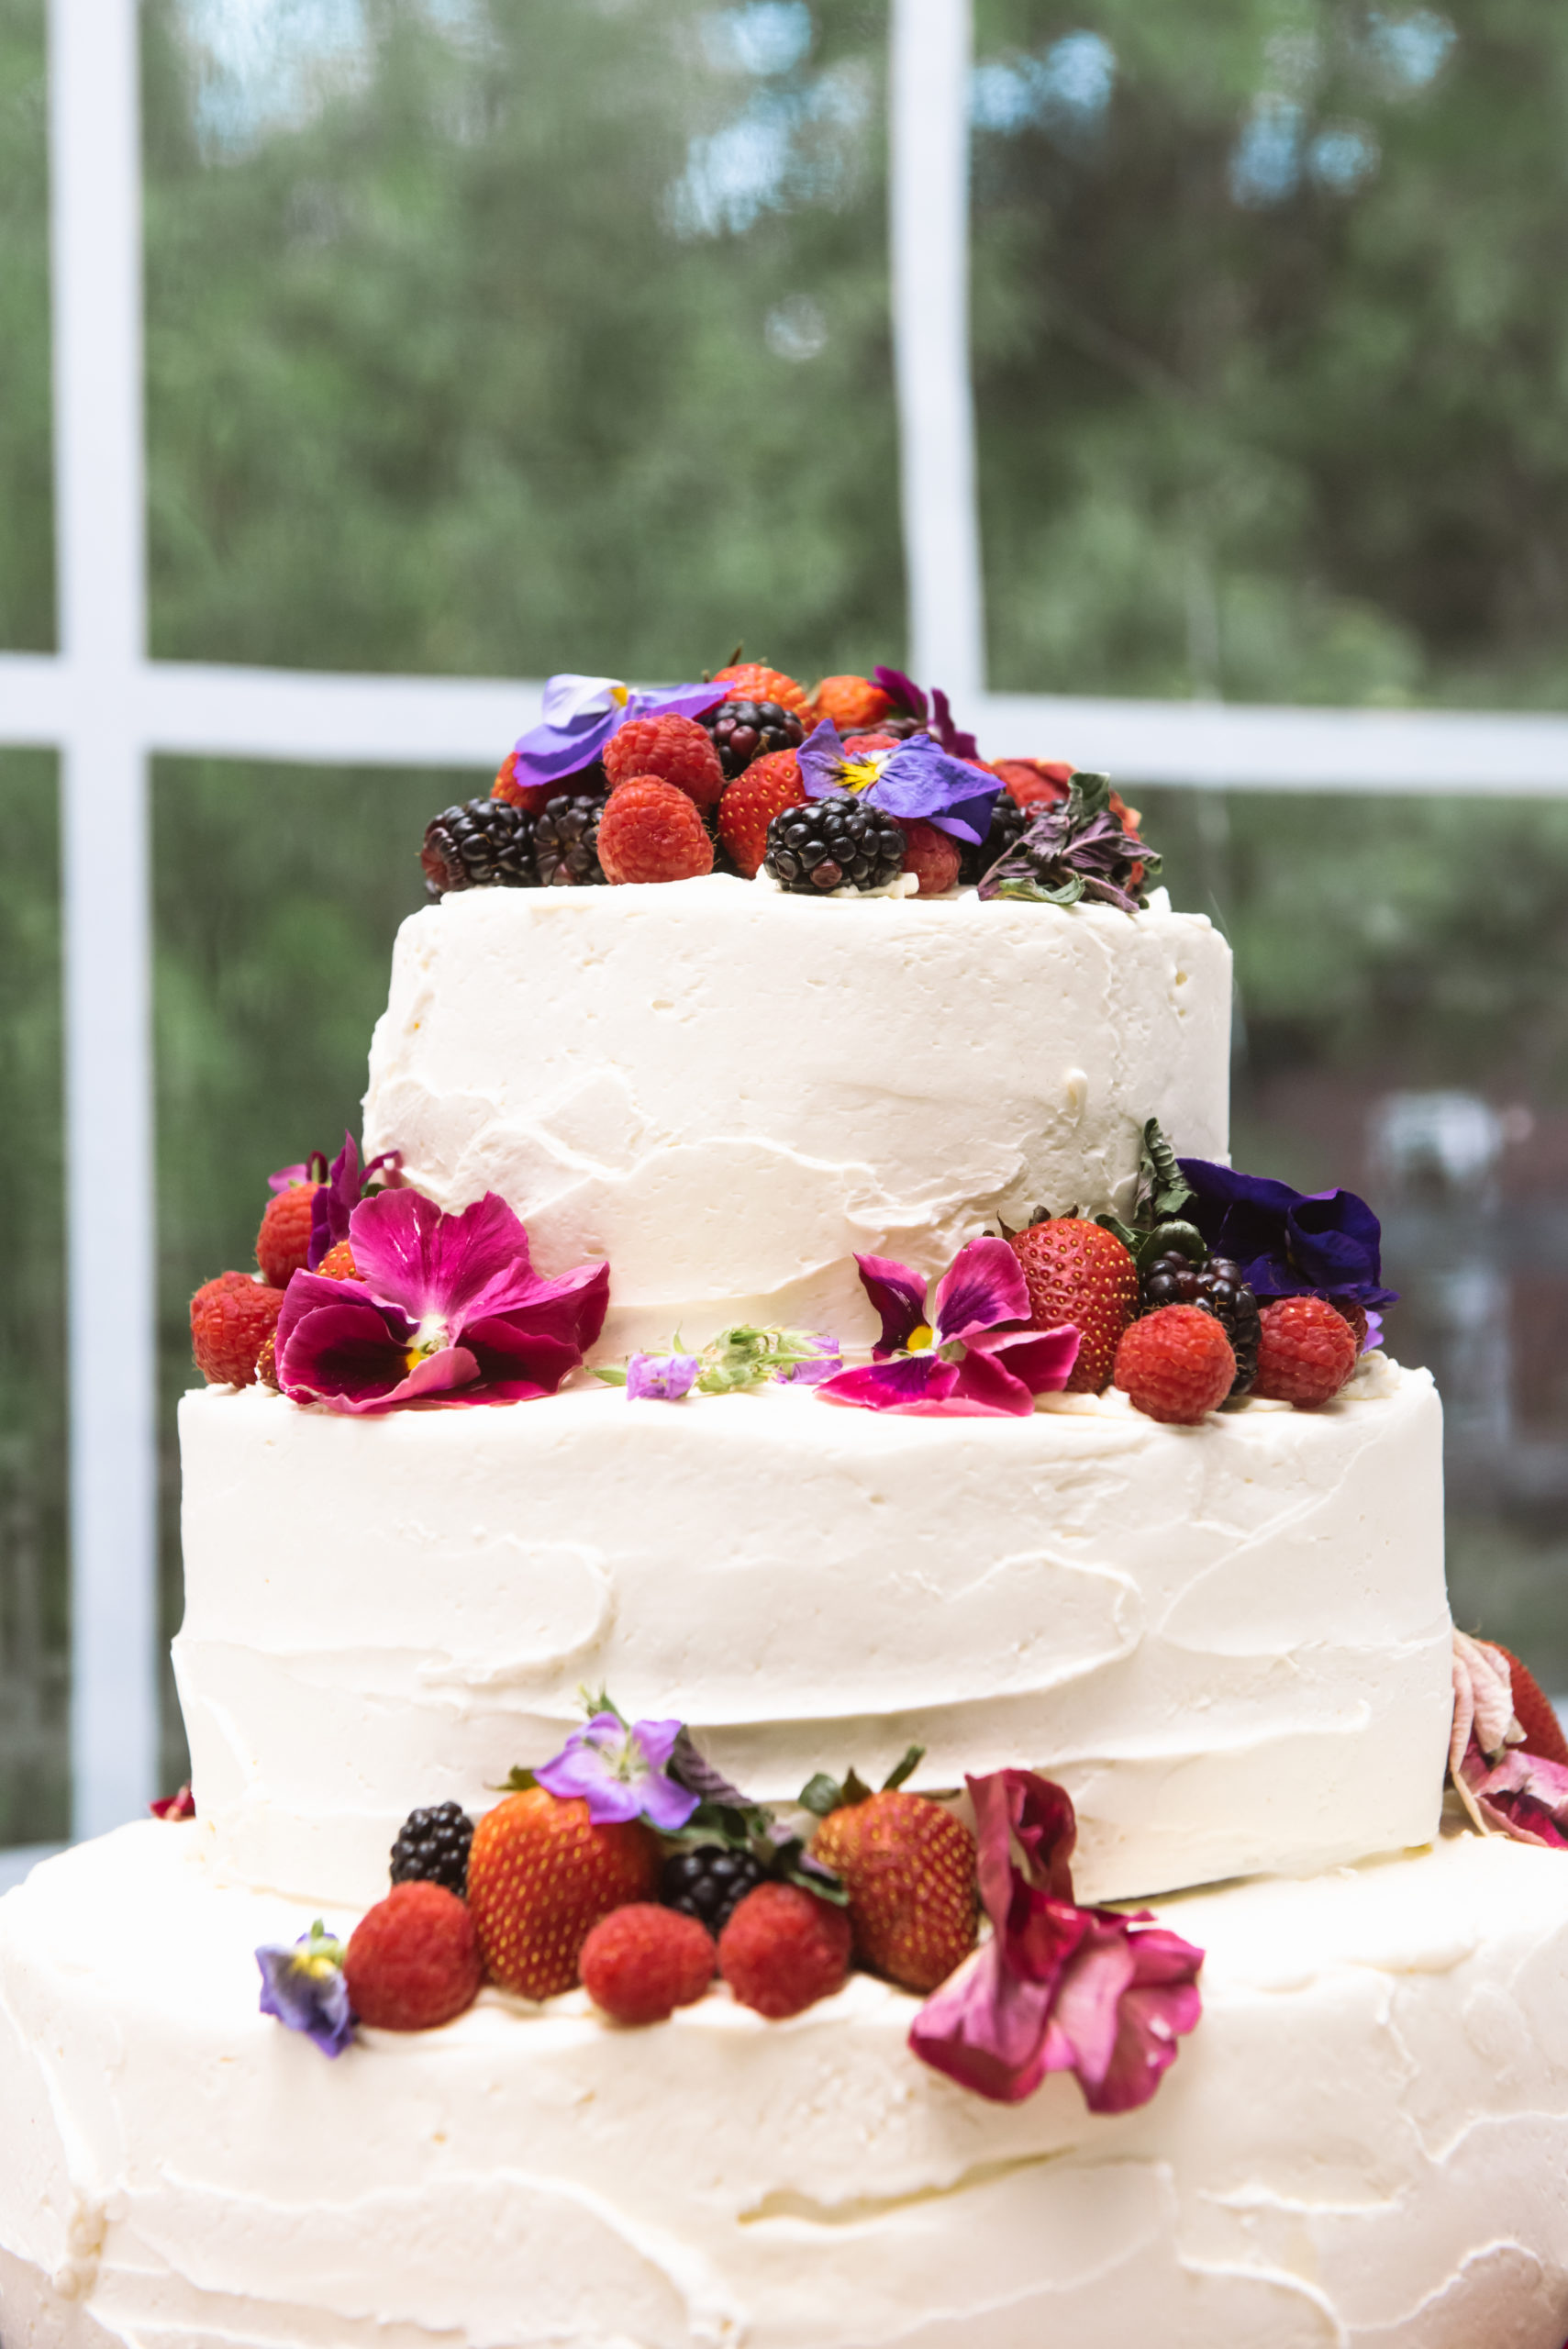 Close up on the top two tiers of a three-tiered white cake adorned with fresh raspberries, strawberries, blackberries, and pink and purple flowers. It is within a white tent.